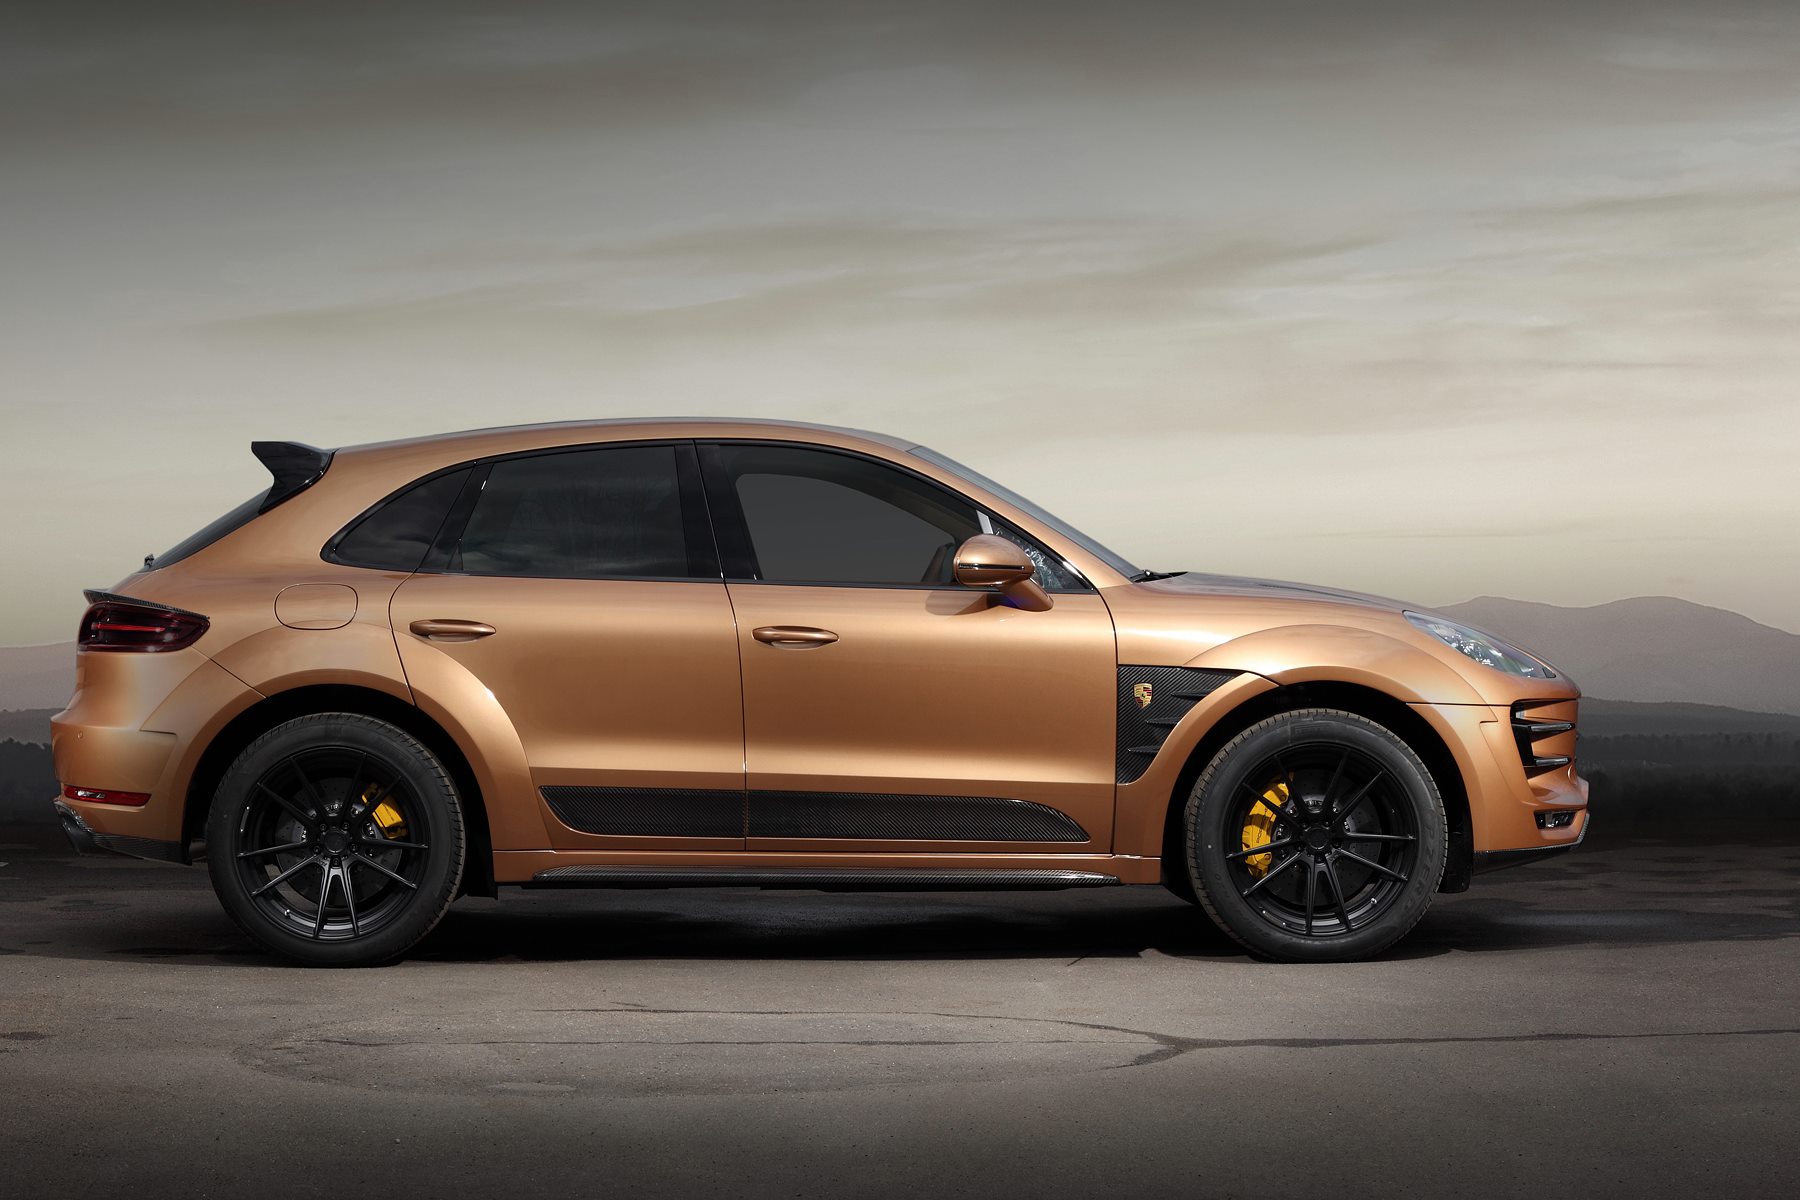 Macan Ursa By Topcar Has Gold Colored Carbon Fiber And Wood